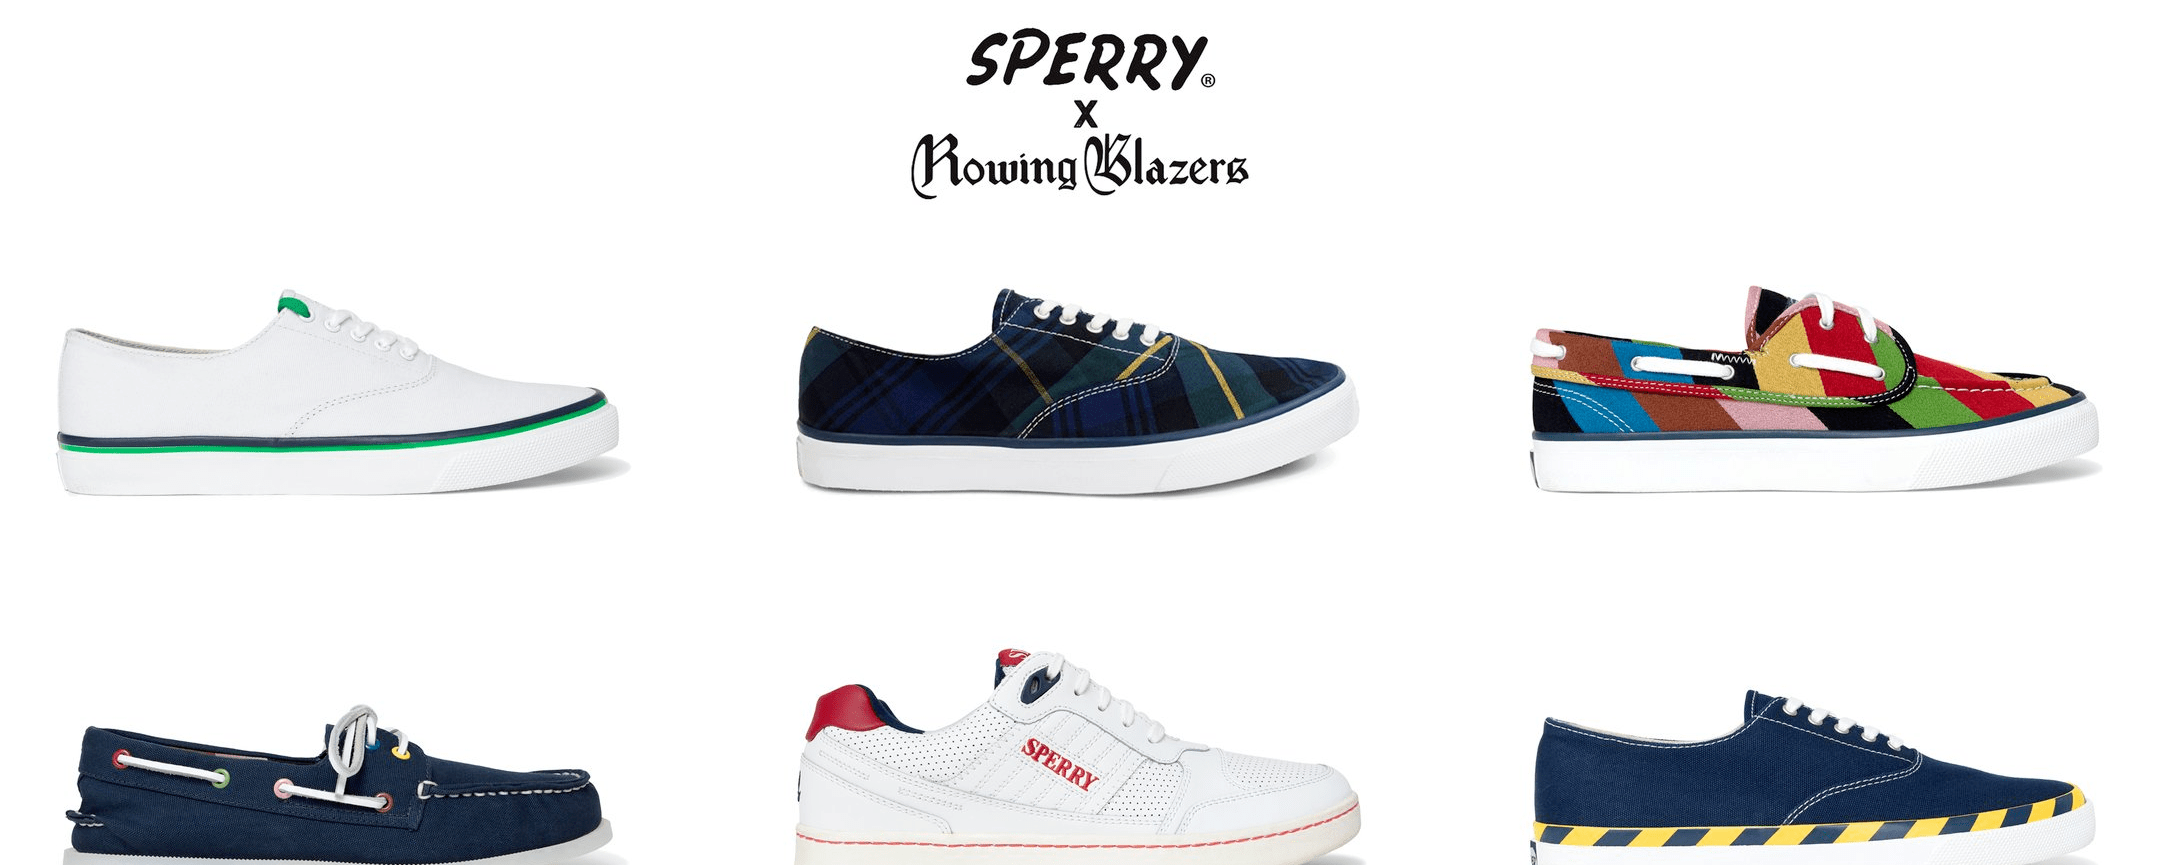 Sperry x Rowing Blazers (Shop Sperry x Rowing Blazers limited edition collaboration)